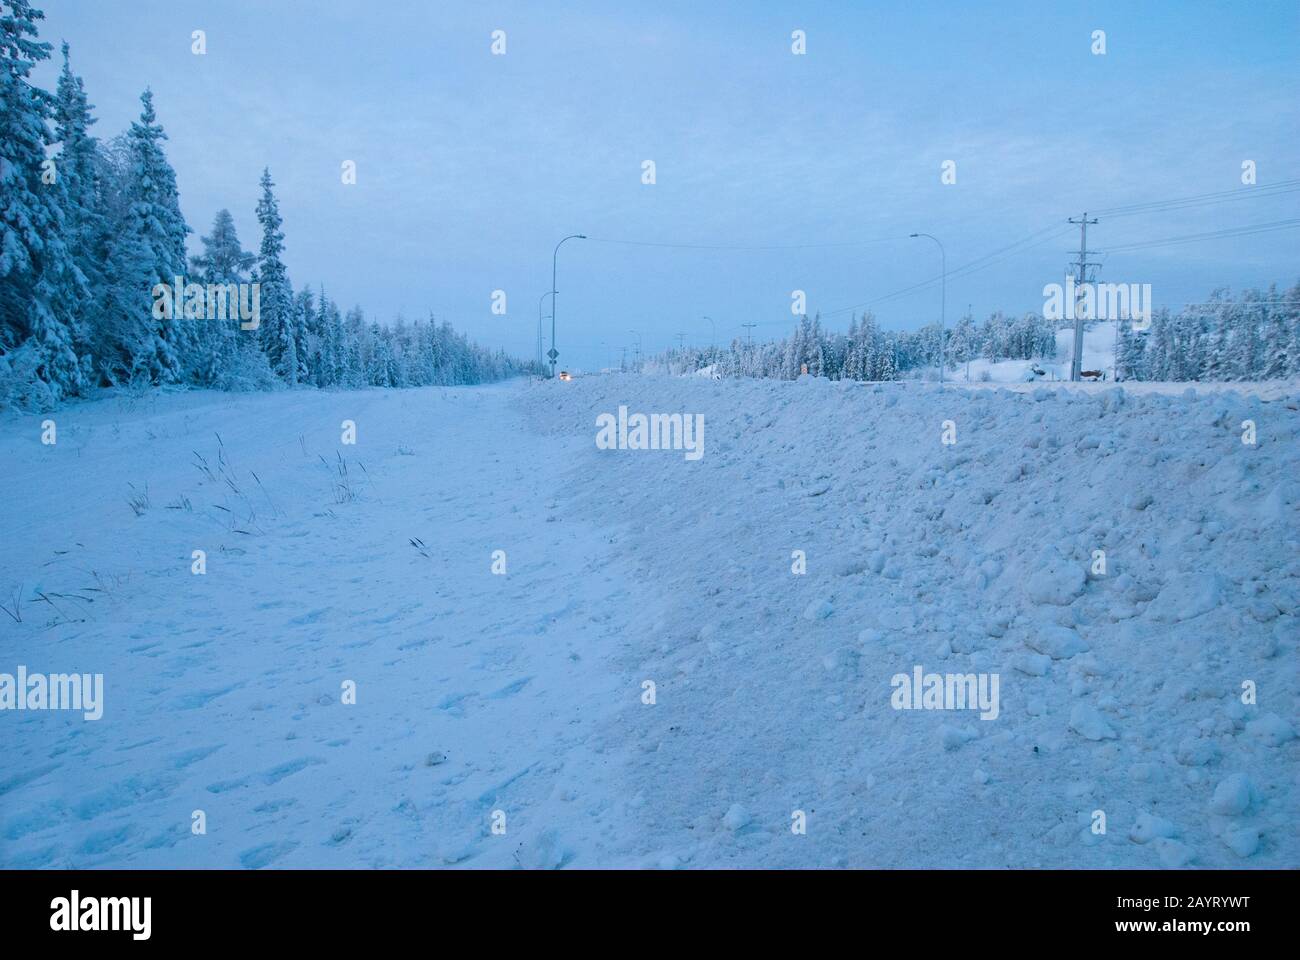 Winter scene by the side of the Yellowknife Highway, Northwest Territories, Canada Stock Photo